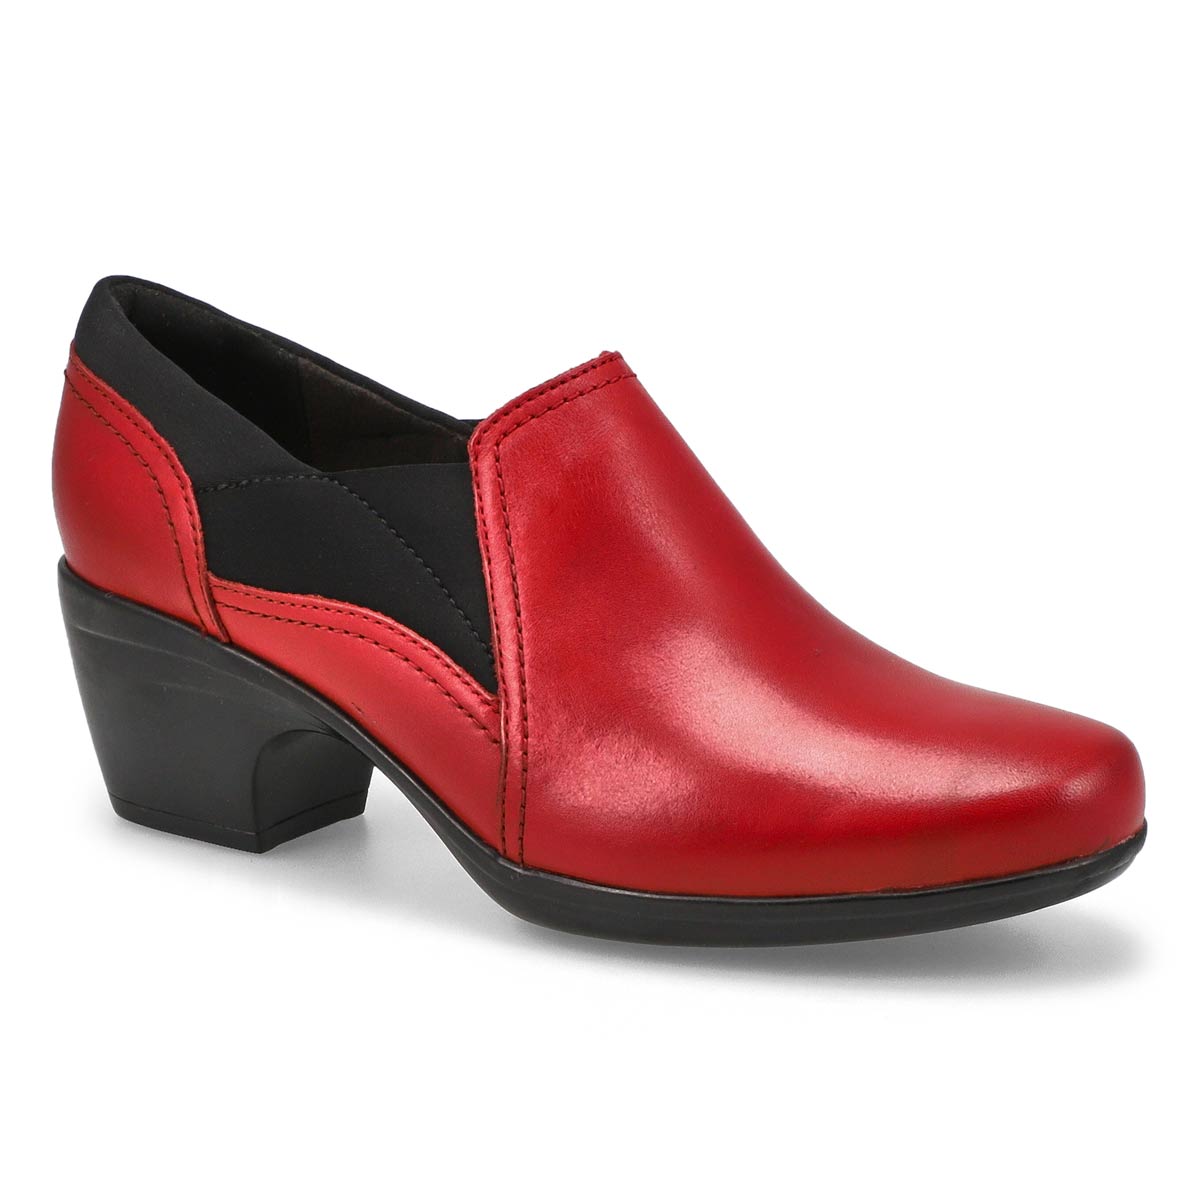 clarks canada shoes online